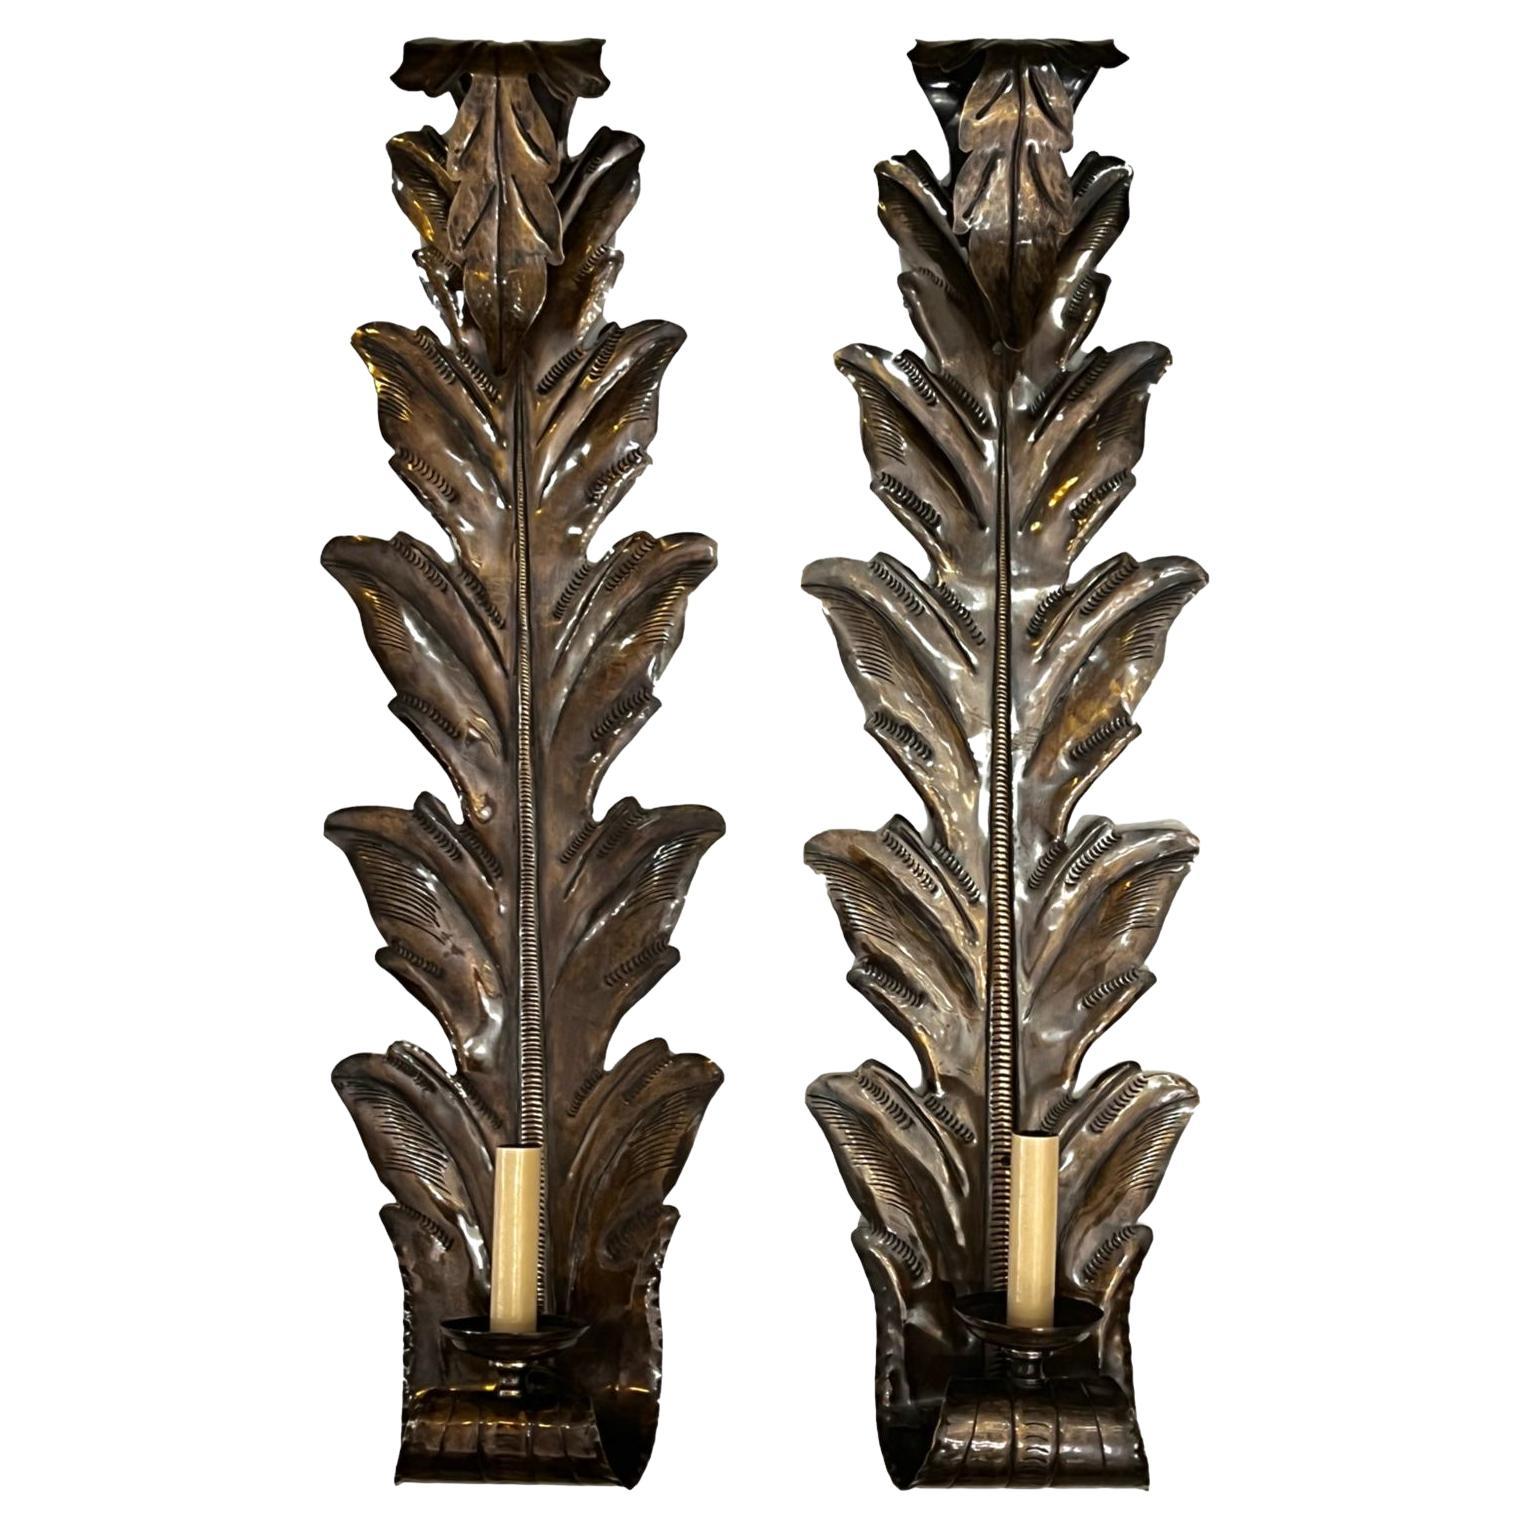 Set of Large Leaf-Shaped Sconces, Sold in Pairs